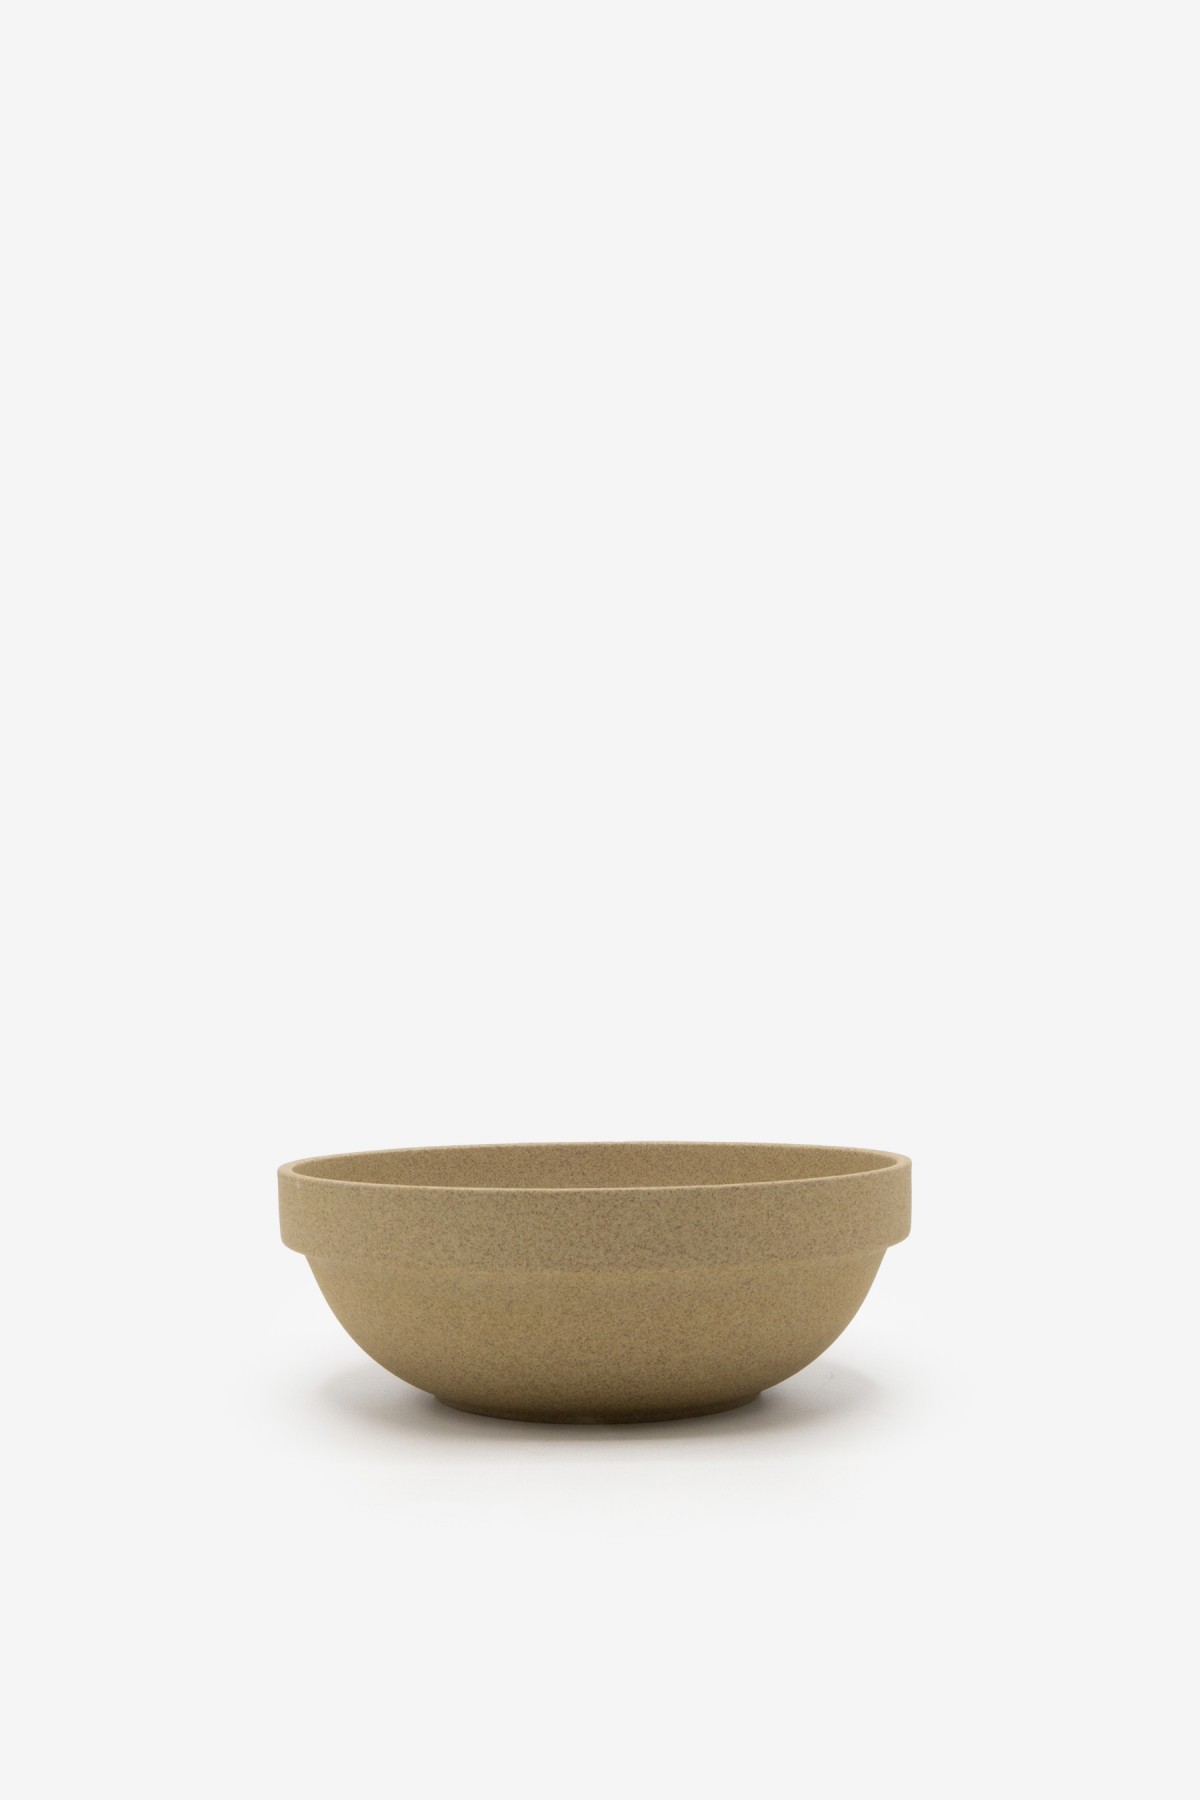 Hasami Porcelain Bowl Round 145x55 in Sand